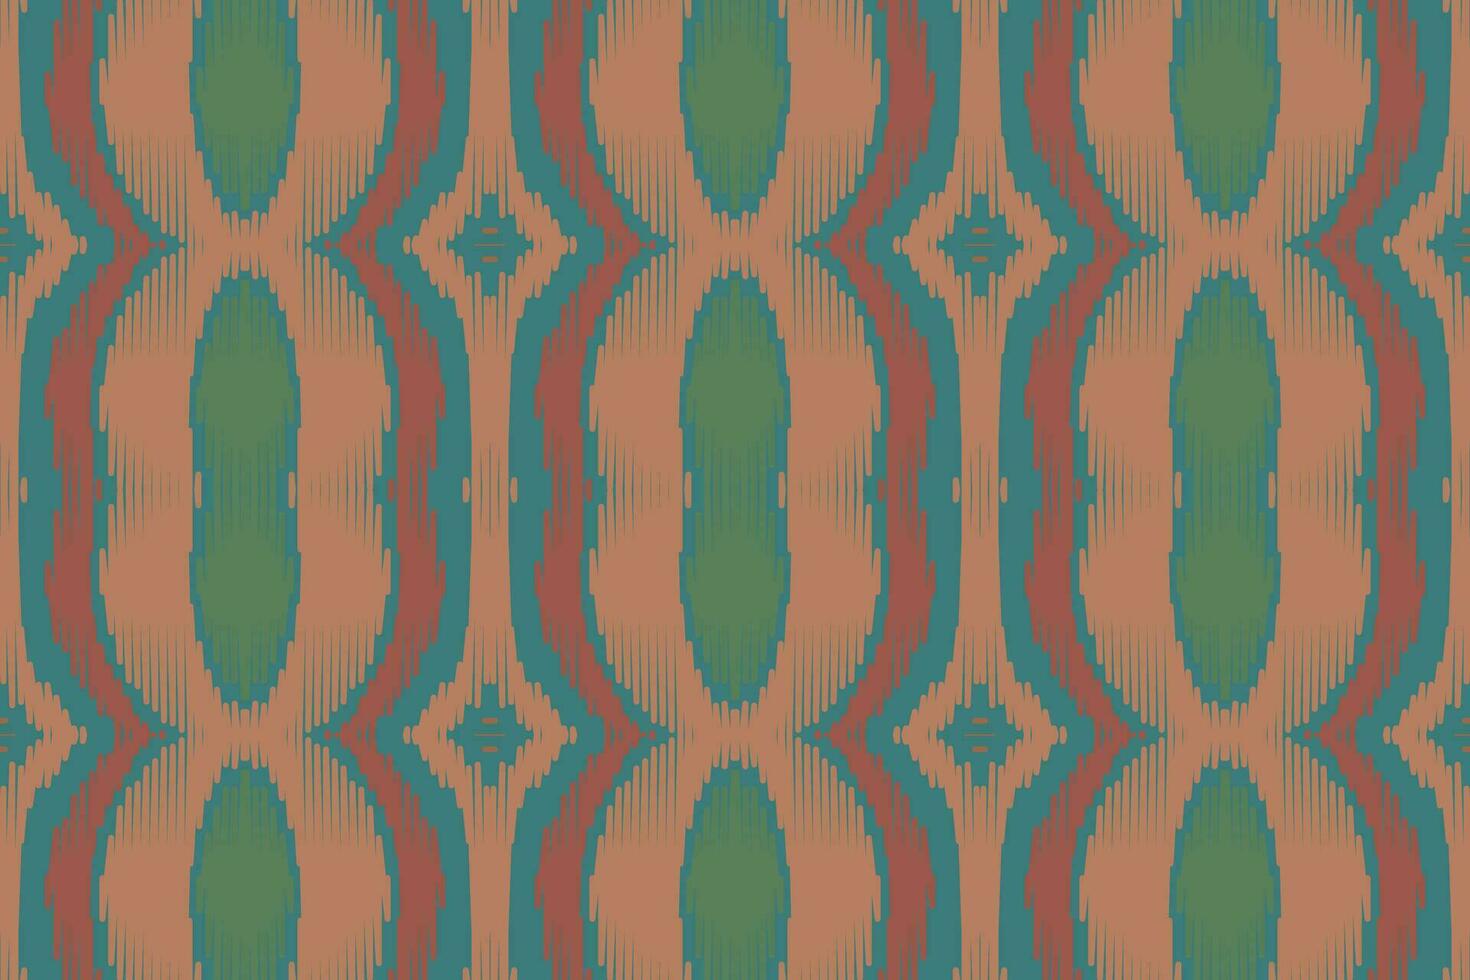 Ikat Seamless Pattern Embroidery Background. Ikat Seamless Geometric Ethnic Oriental Pattern traditional.aztec Style Abstract Vector design for Texture,fabric,clothing,wrapping,sarong.